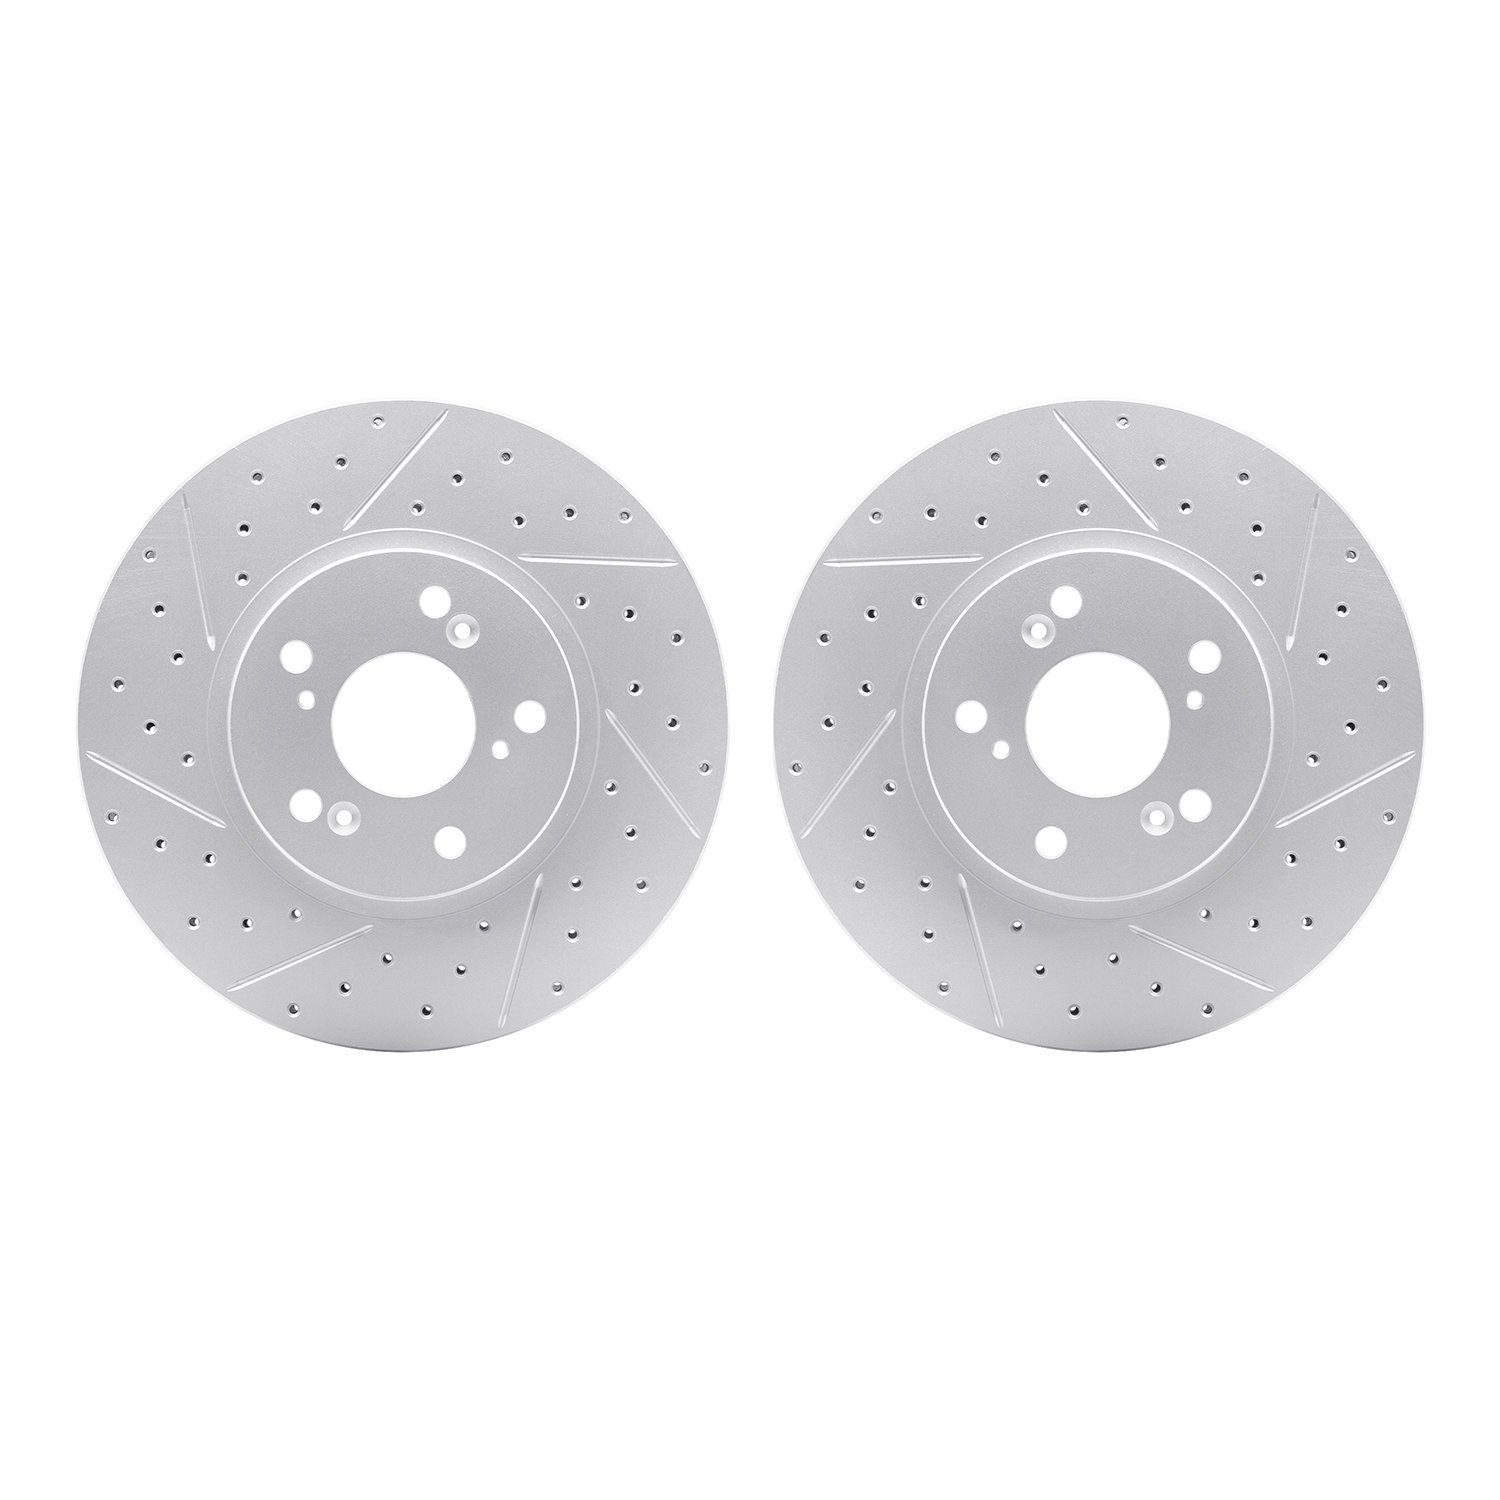 2002-59002 Geoperformance Drilled/Slotted Brake Rotors, 1999-2014 Acura/Honda, Position: Front